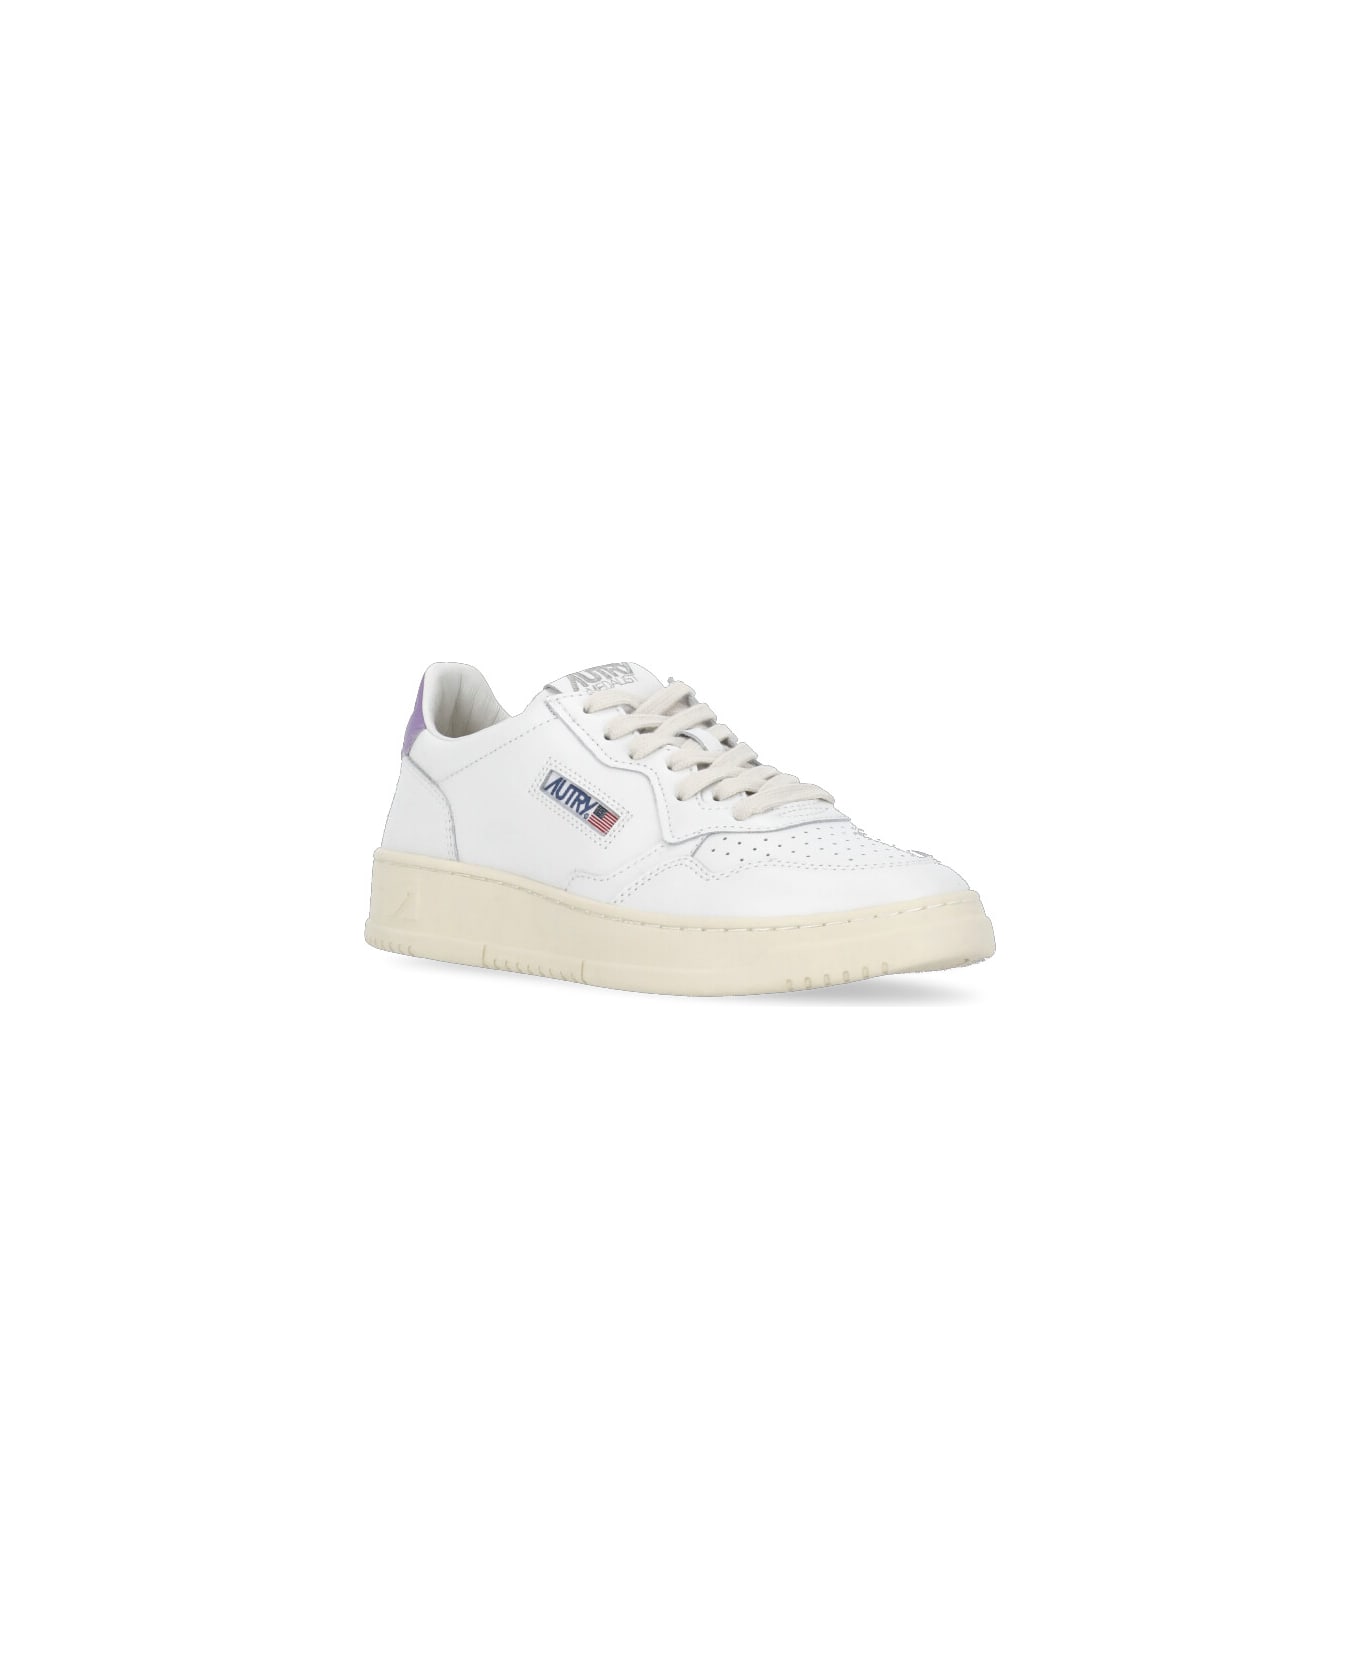 Autry Sneakers Medalist Low - Wht/engl lav